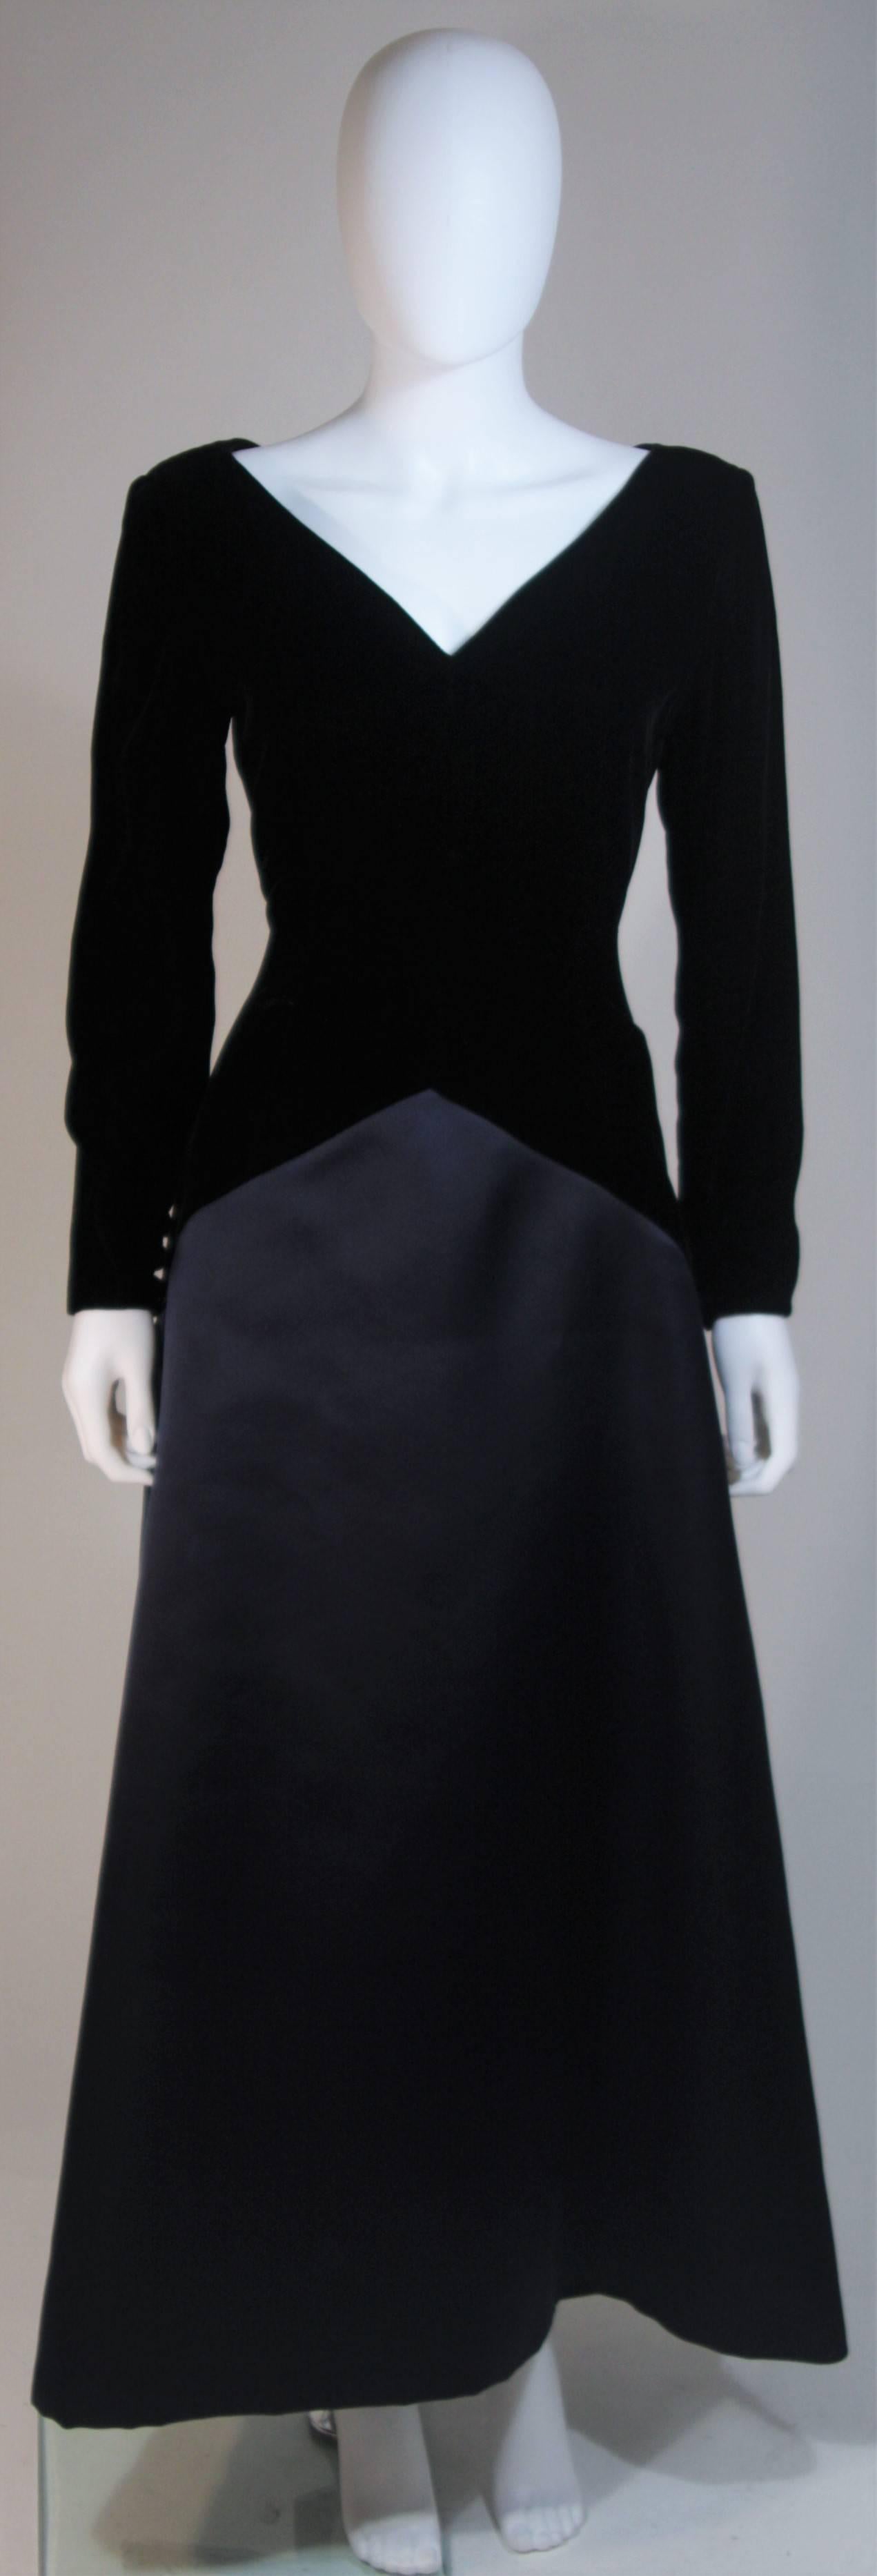  This Bill Blass  gown is composed of a black velvet with contrasting satin skirt. There is a center back zipper closure and button closures at the sleeve end. In excellent vintage condition. 

  **Please cross-reference measurements for personal